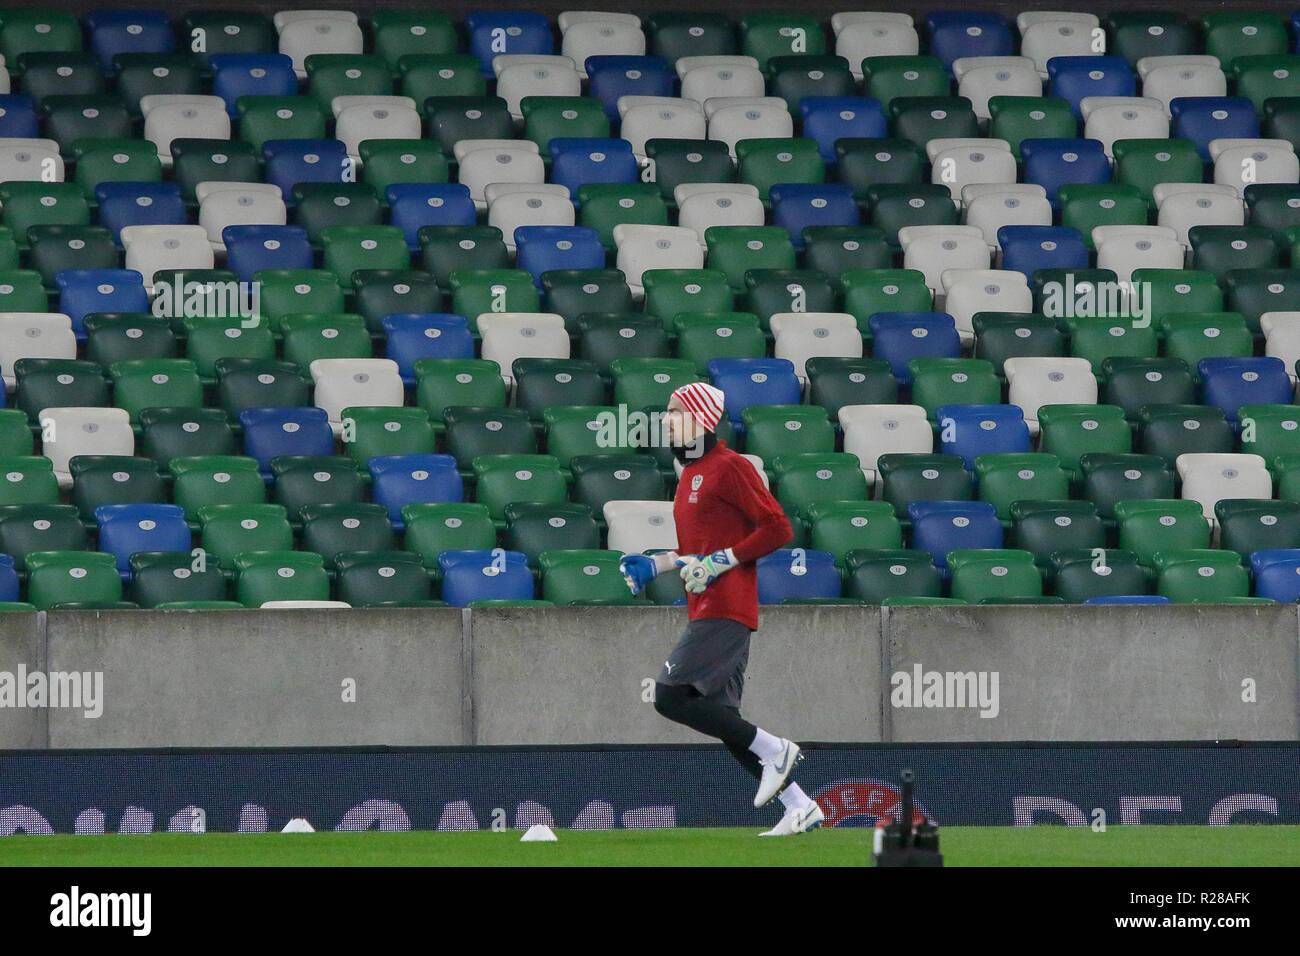 Windsor Park, Belfast, Northern Ireland.17 November 2018. Austria training in Belfast this evening before their UEFA Nations League game against Northern Ireland tomorrow night. Credit: David Hunter/Alamy Live News. Stock Photo